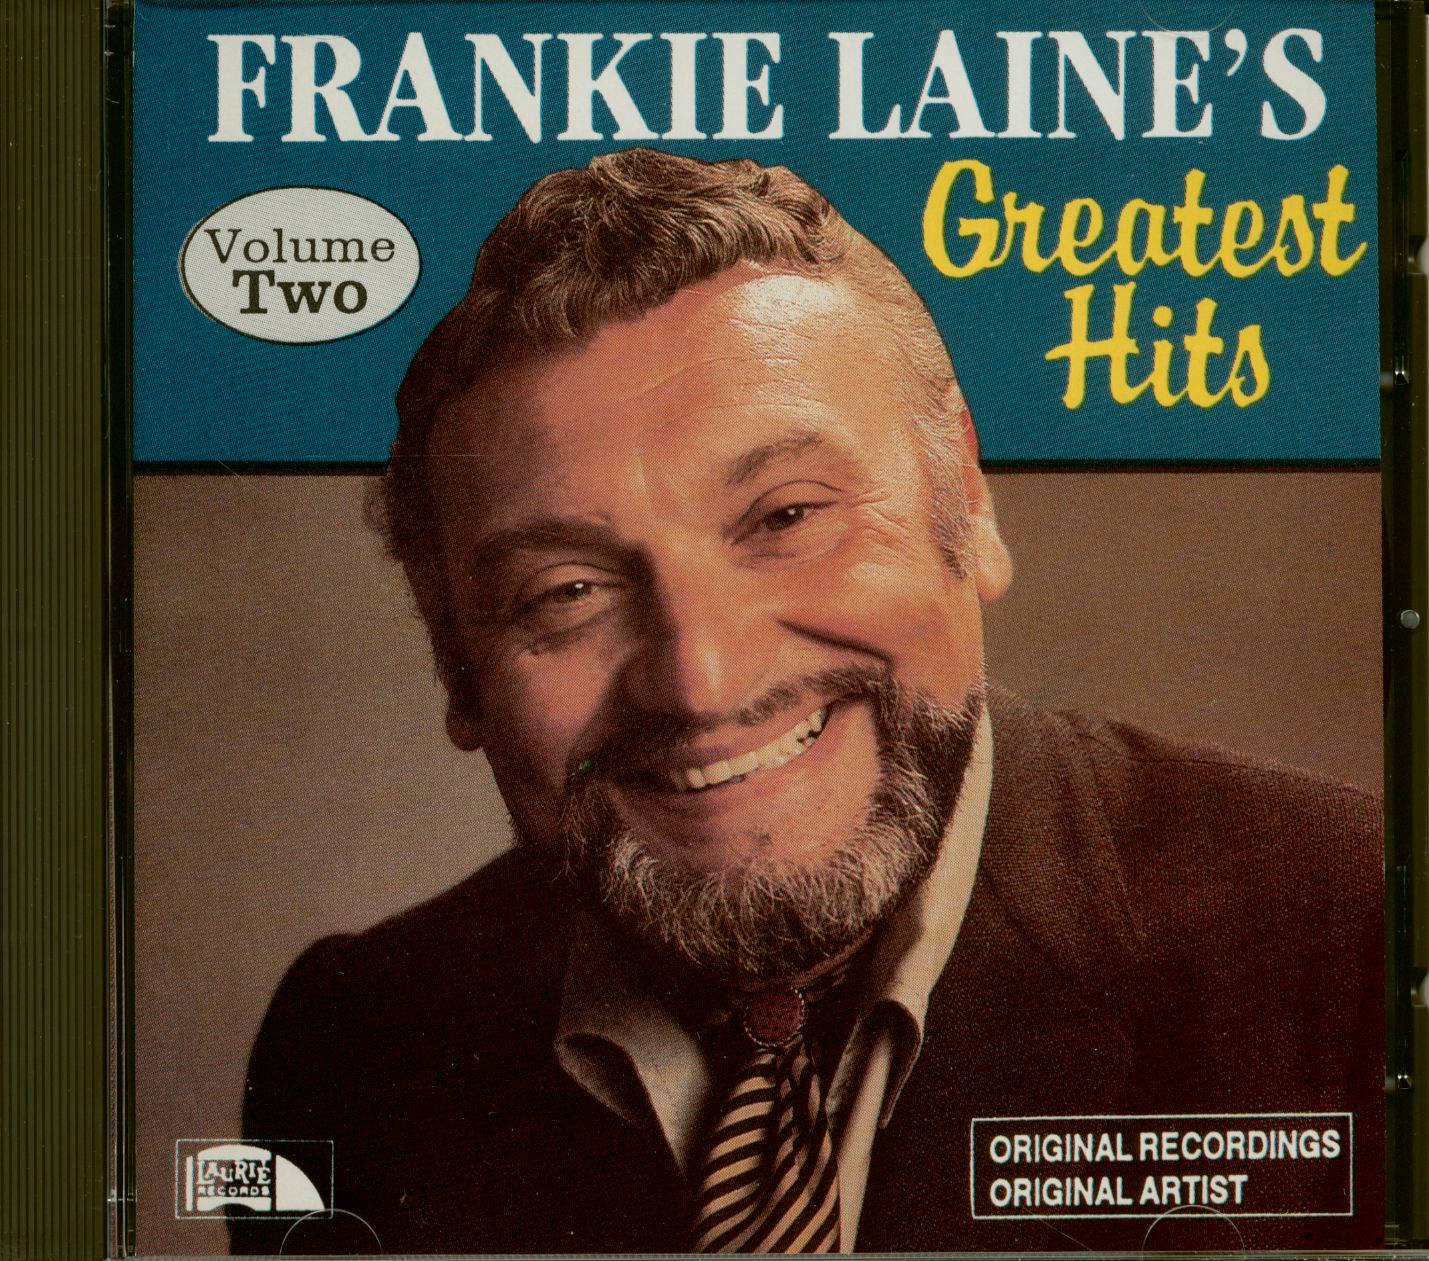 Frankie Laine's Greatest Hits Volume Two Album Cover Wallpaper